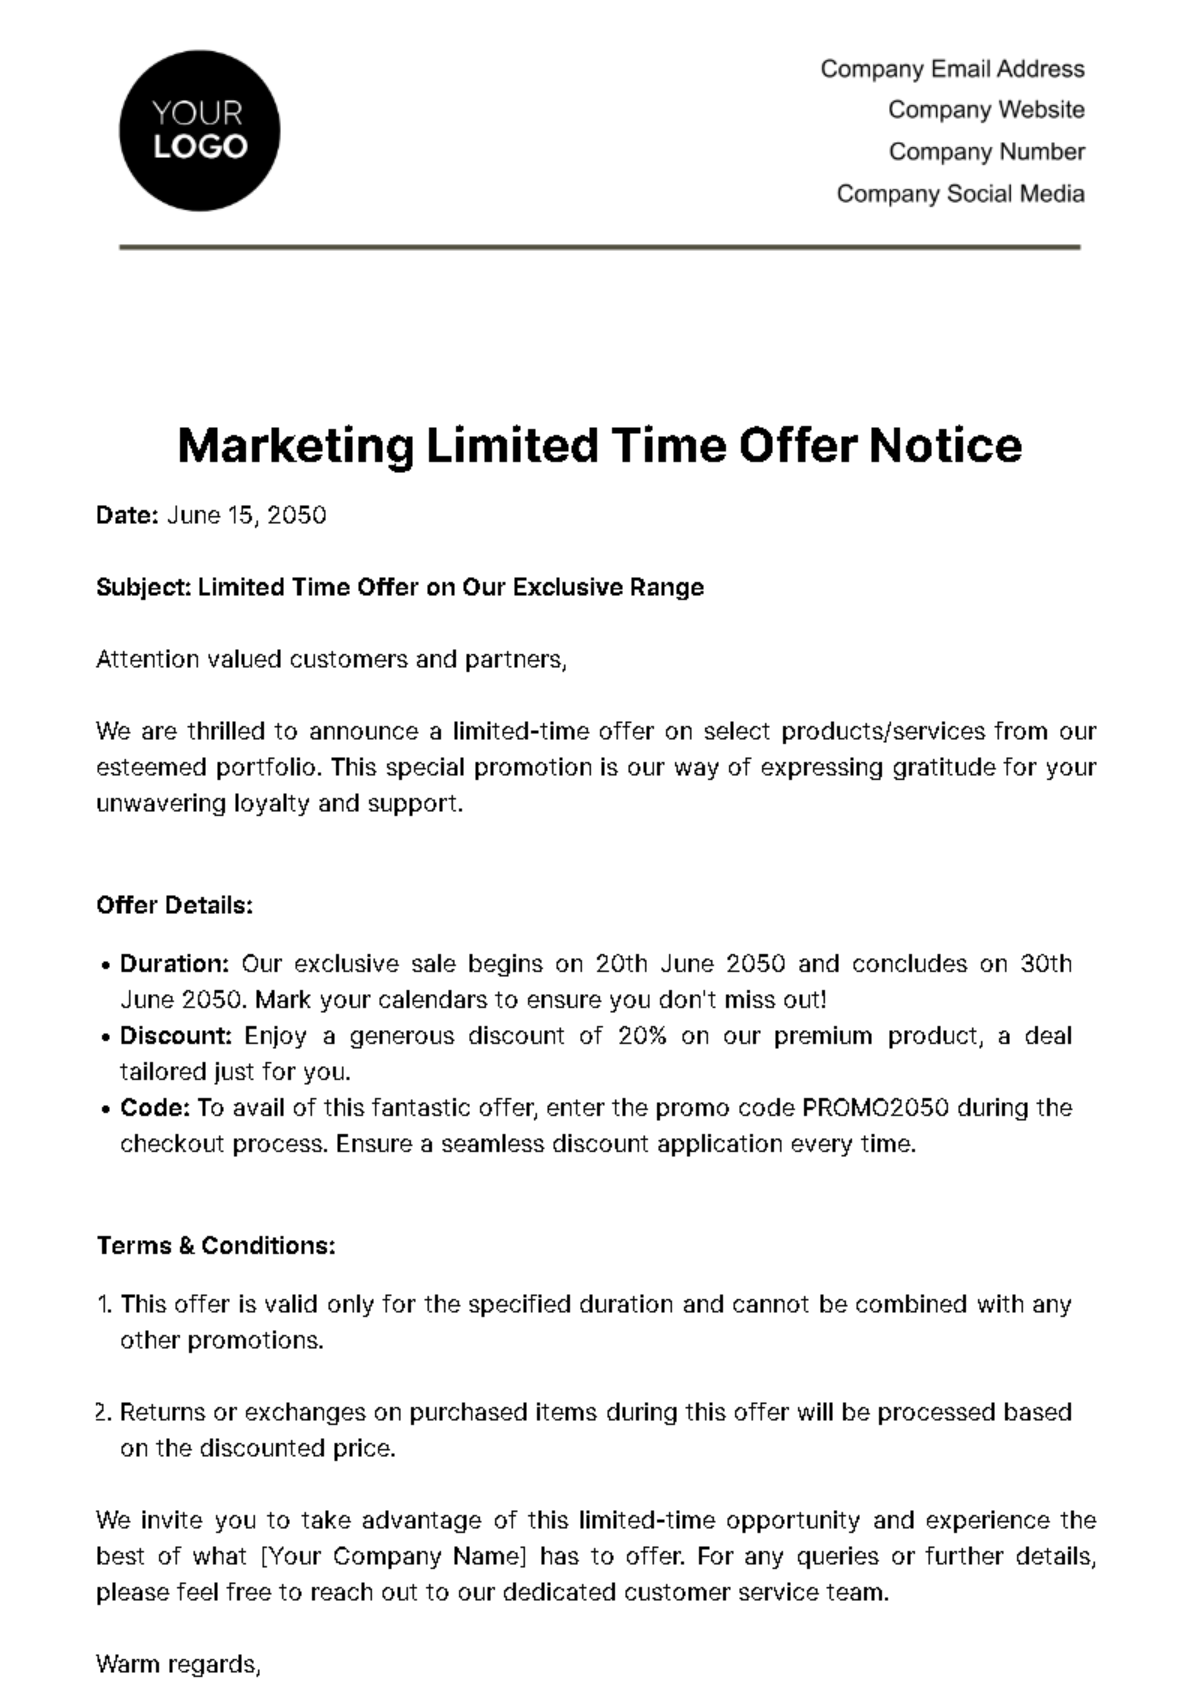 Free Marketing Limited Time Offer Notice Template